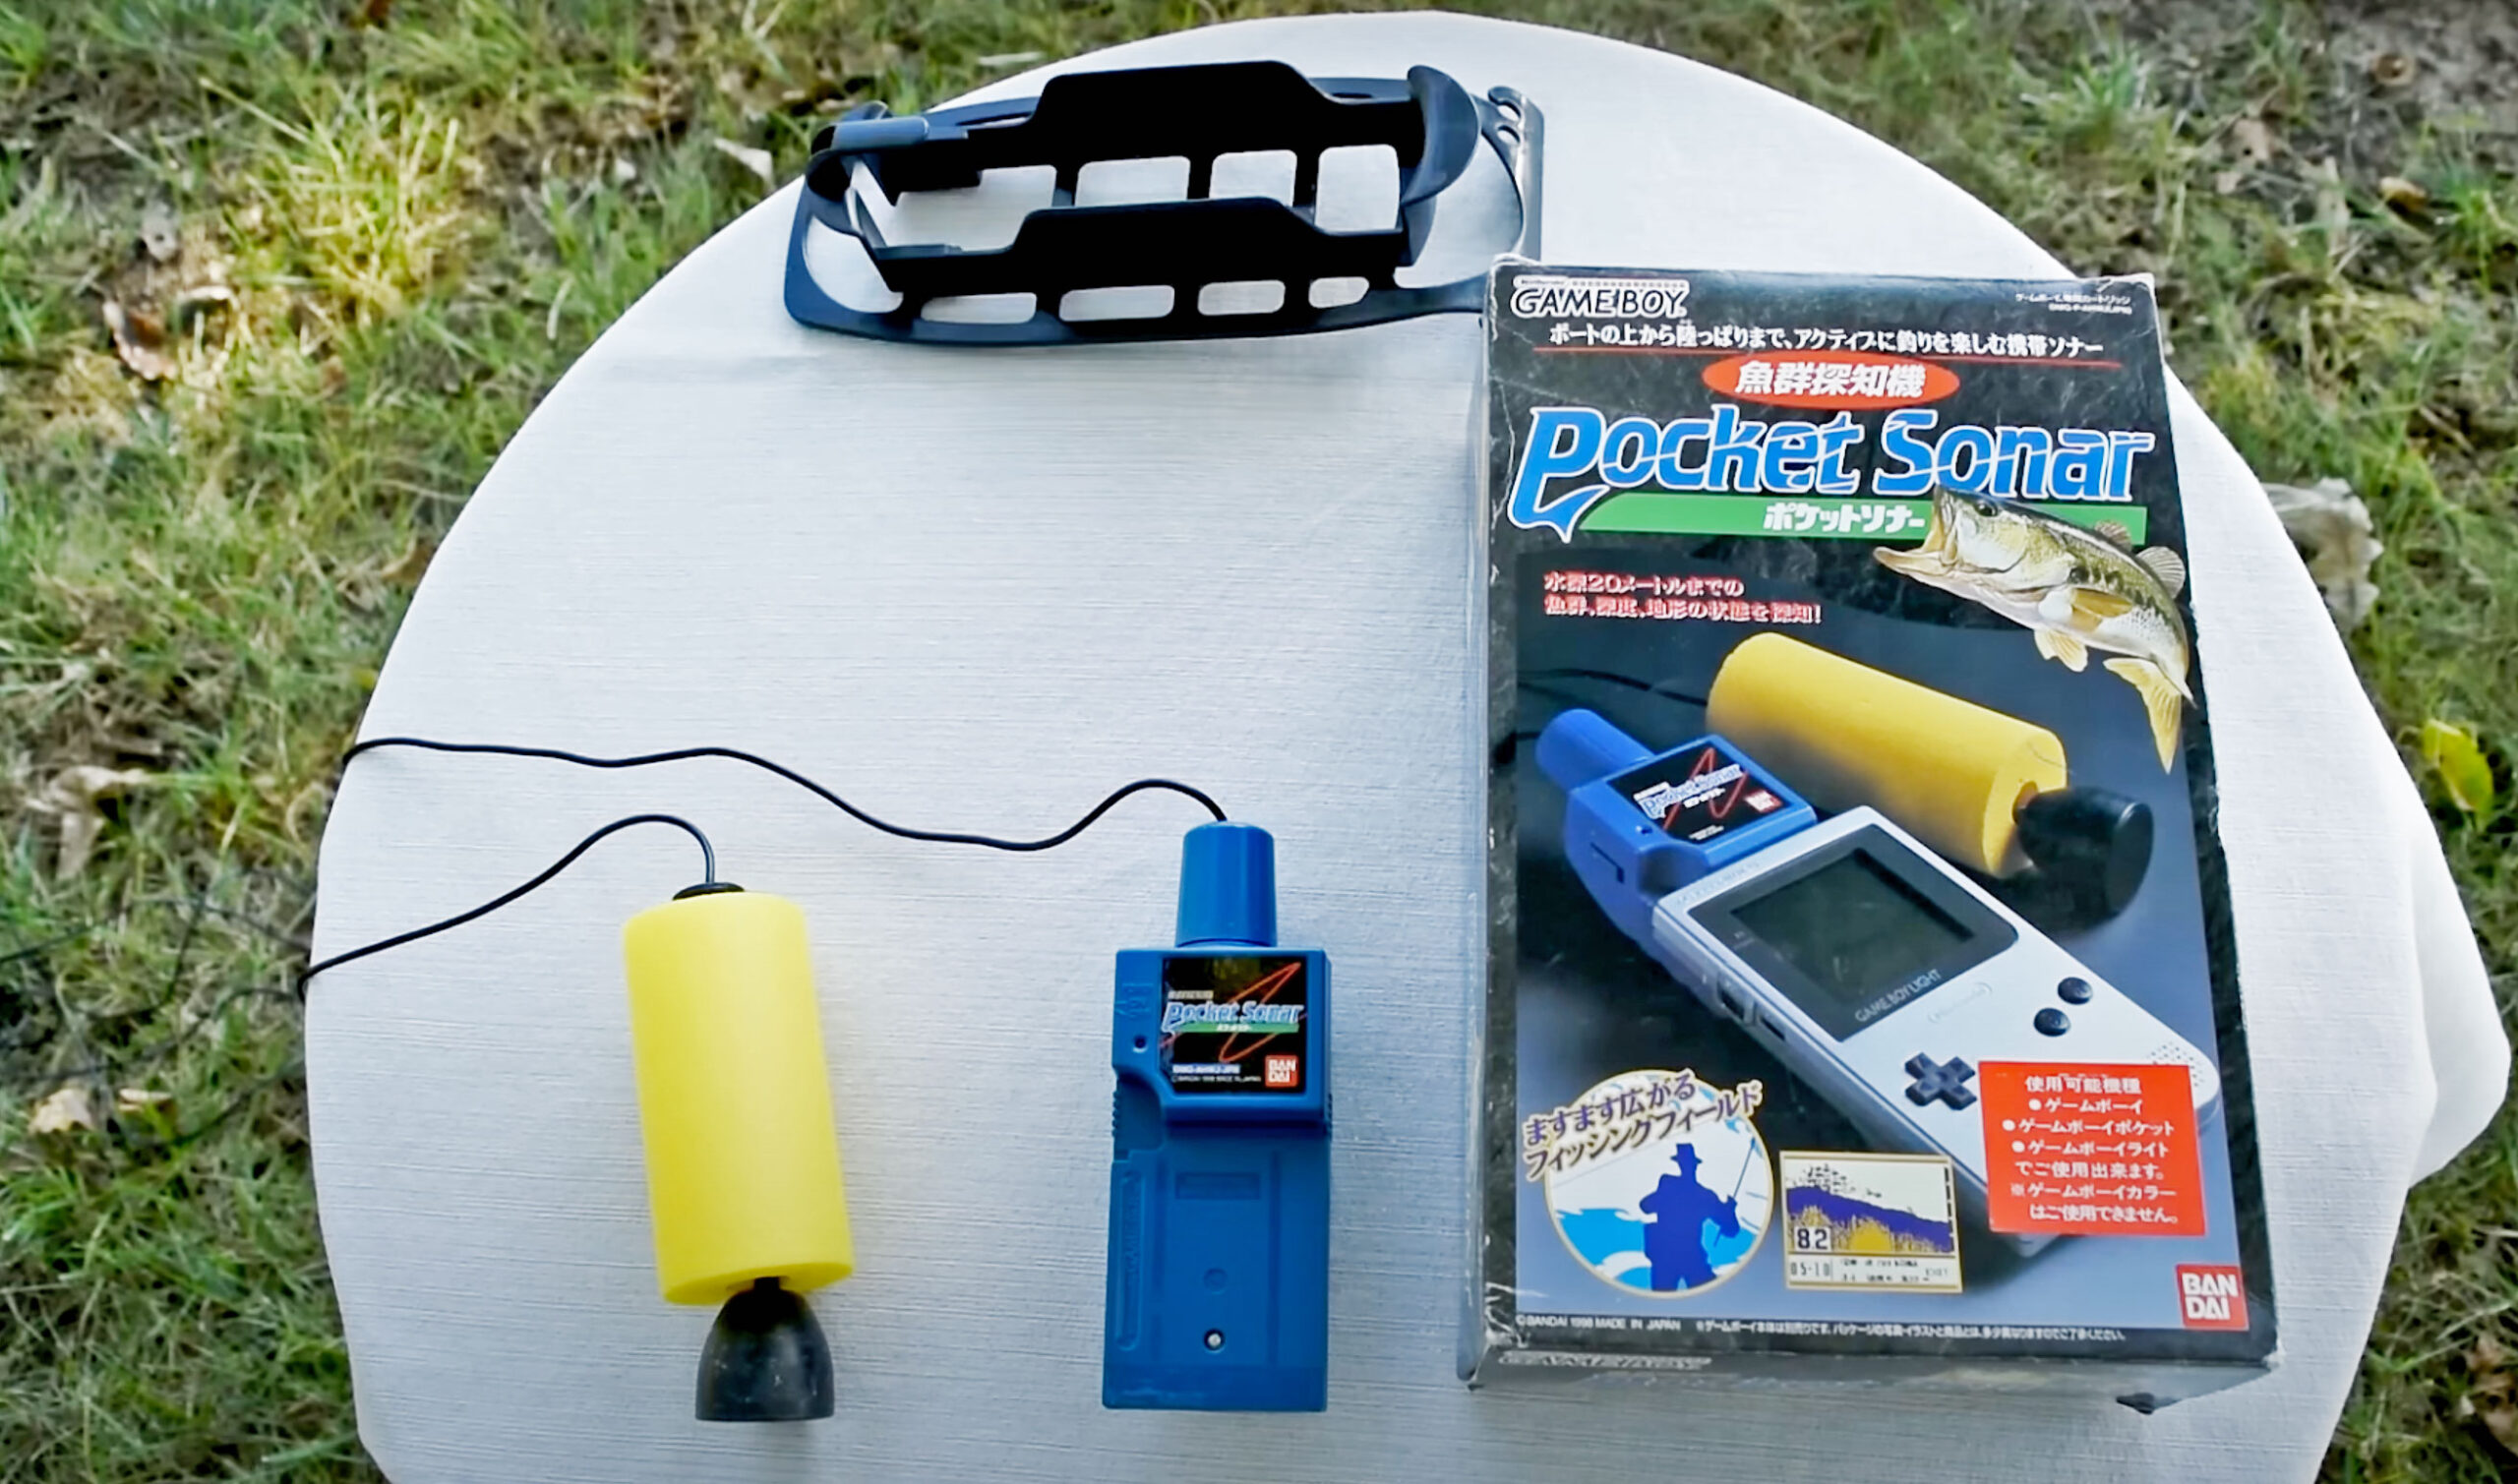 Check out this Game Boy peripheral used for… fishing? – Nintendo Wire